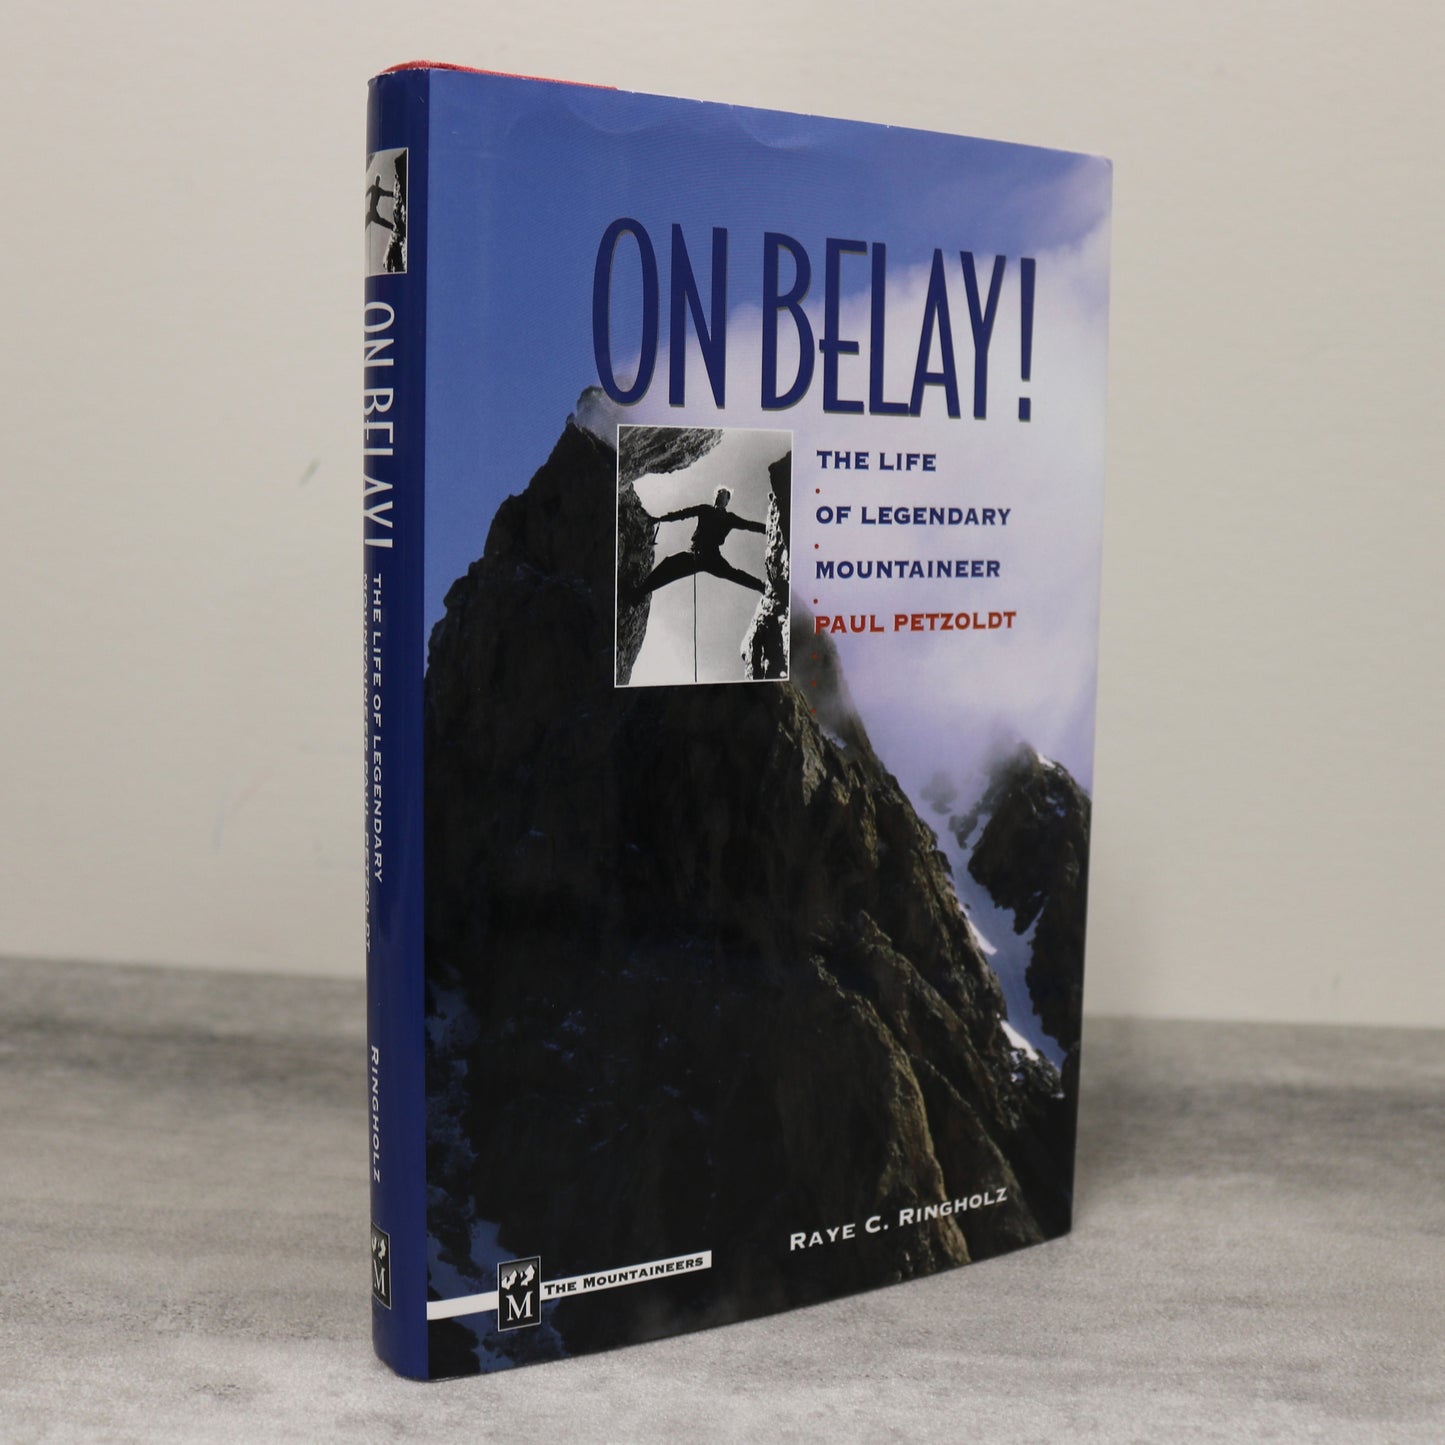 On Belay Paul Petzoldt Climber Climbing Mountaineering Biography Used Book